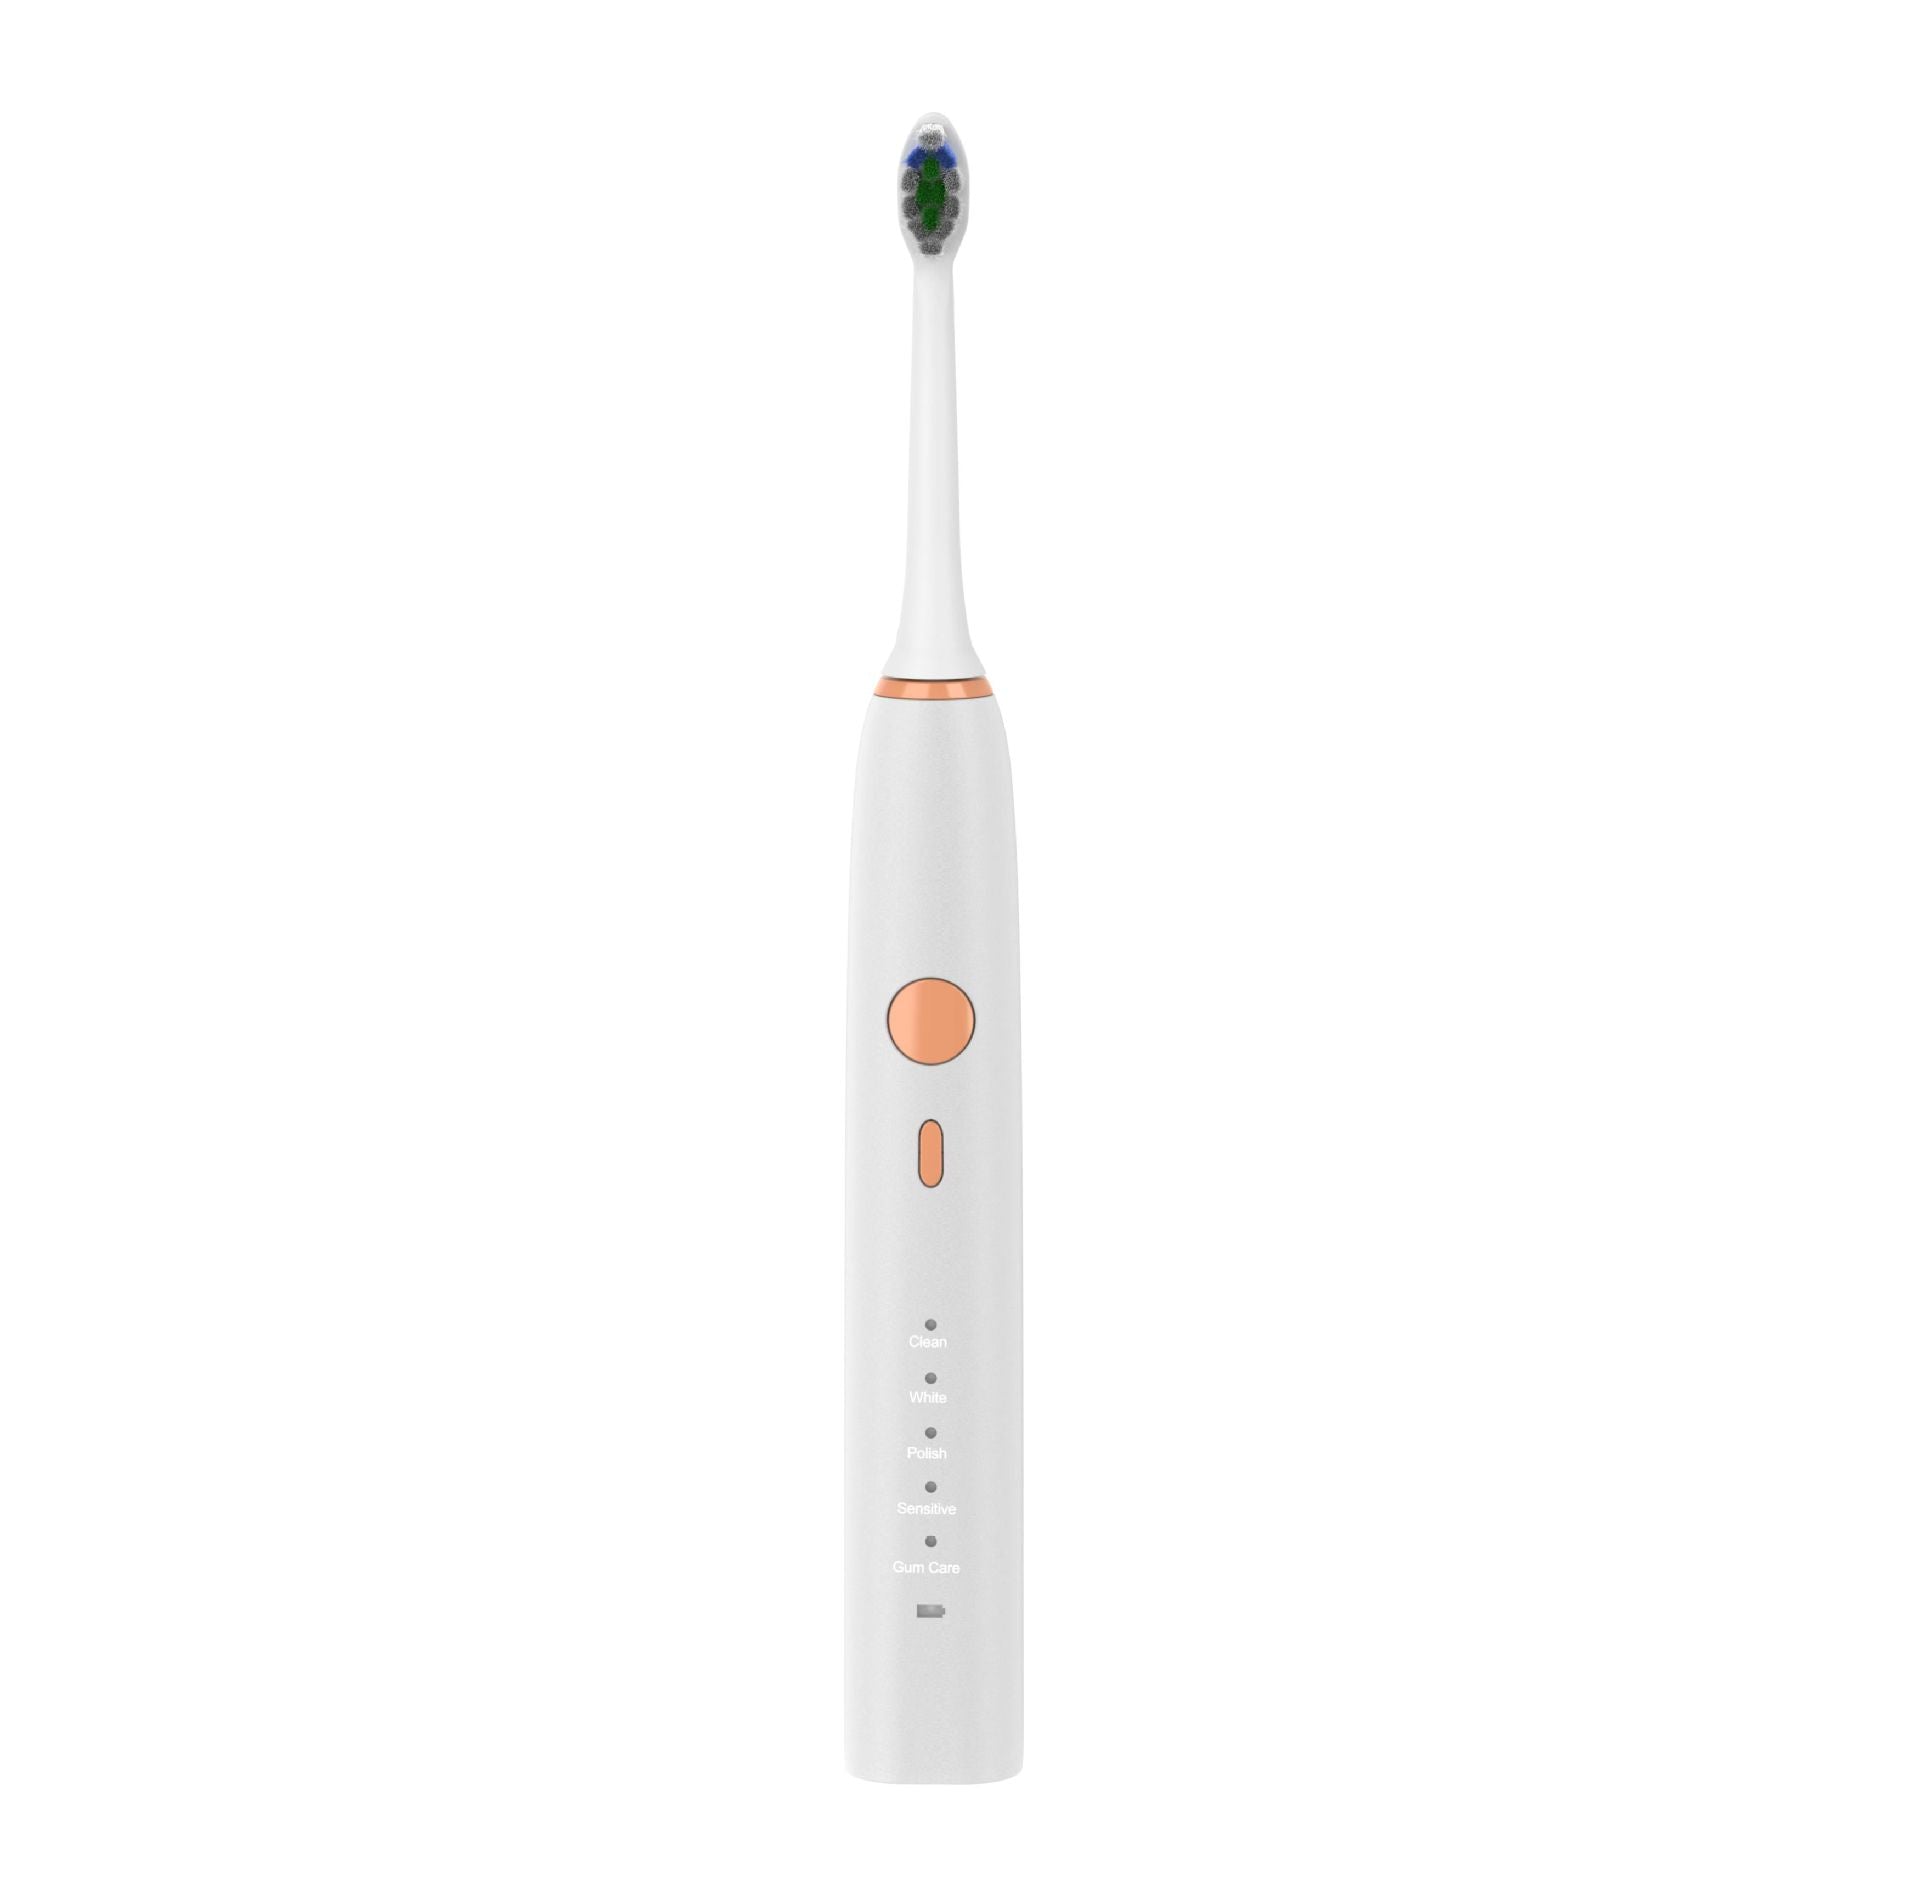 Wireless Charger Electric Toothbrush Smart Electric Toothbrush